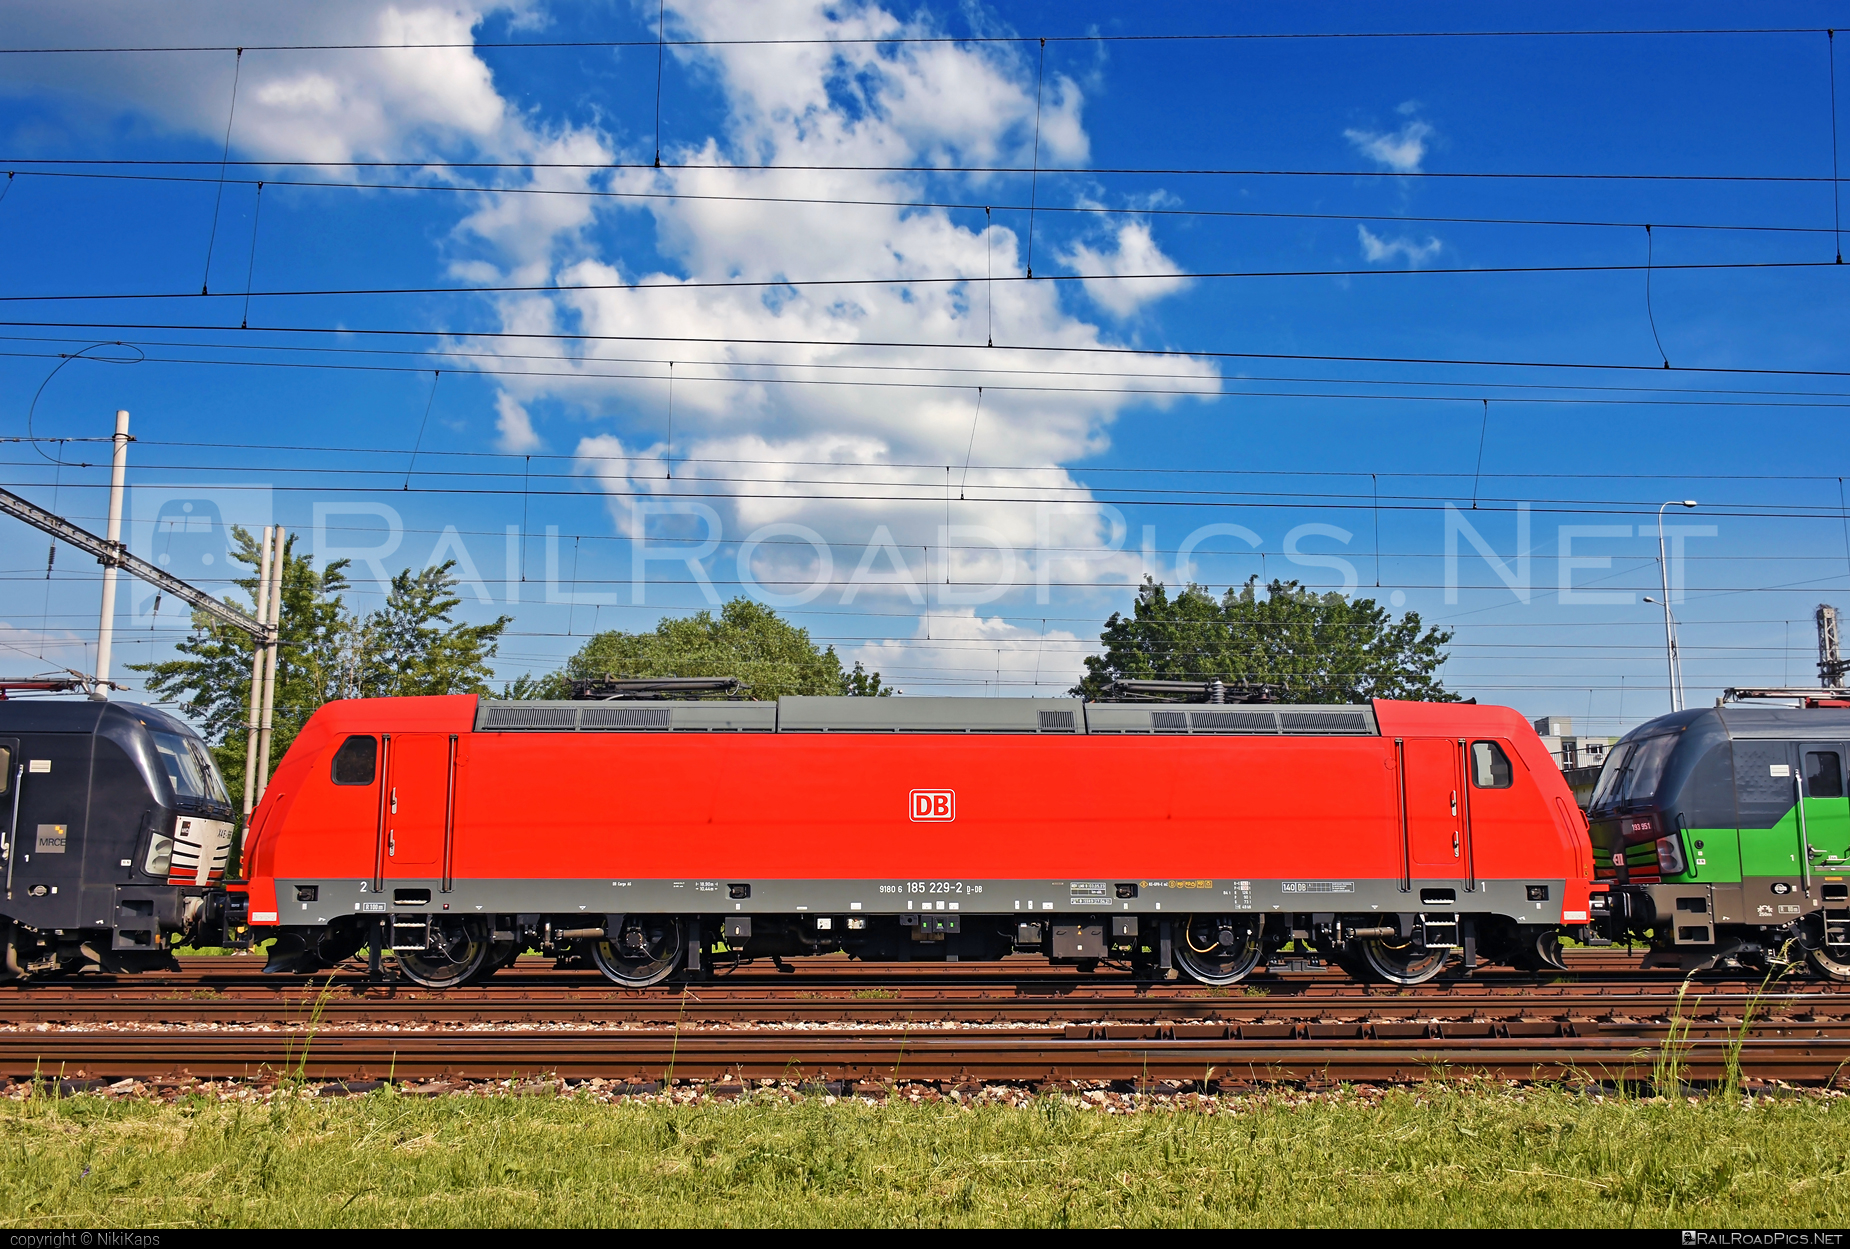 Bombardier TRAXX F140 AC2 - 185 229-2 operated by DB Cargo AG #bombardier #bombardiertraxx #db #dbcargo #dbcargoag #deutschebahn #traxx #traxxf140 #traxxf140ac #traxxf140ac2